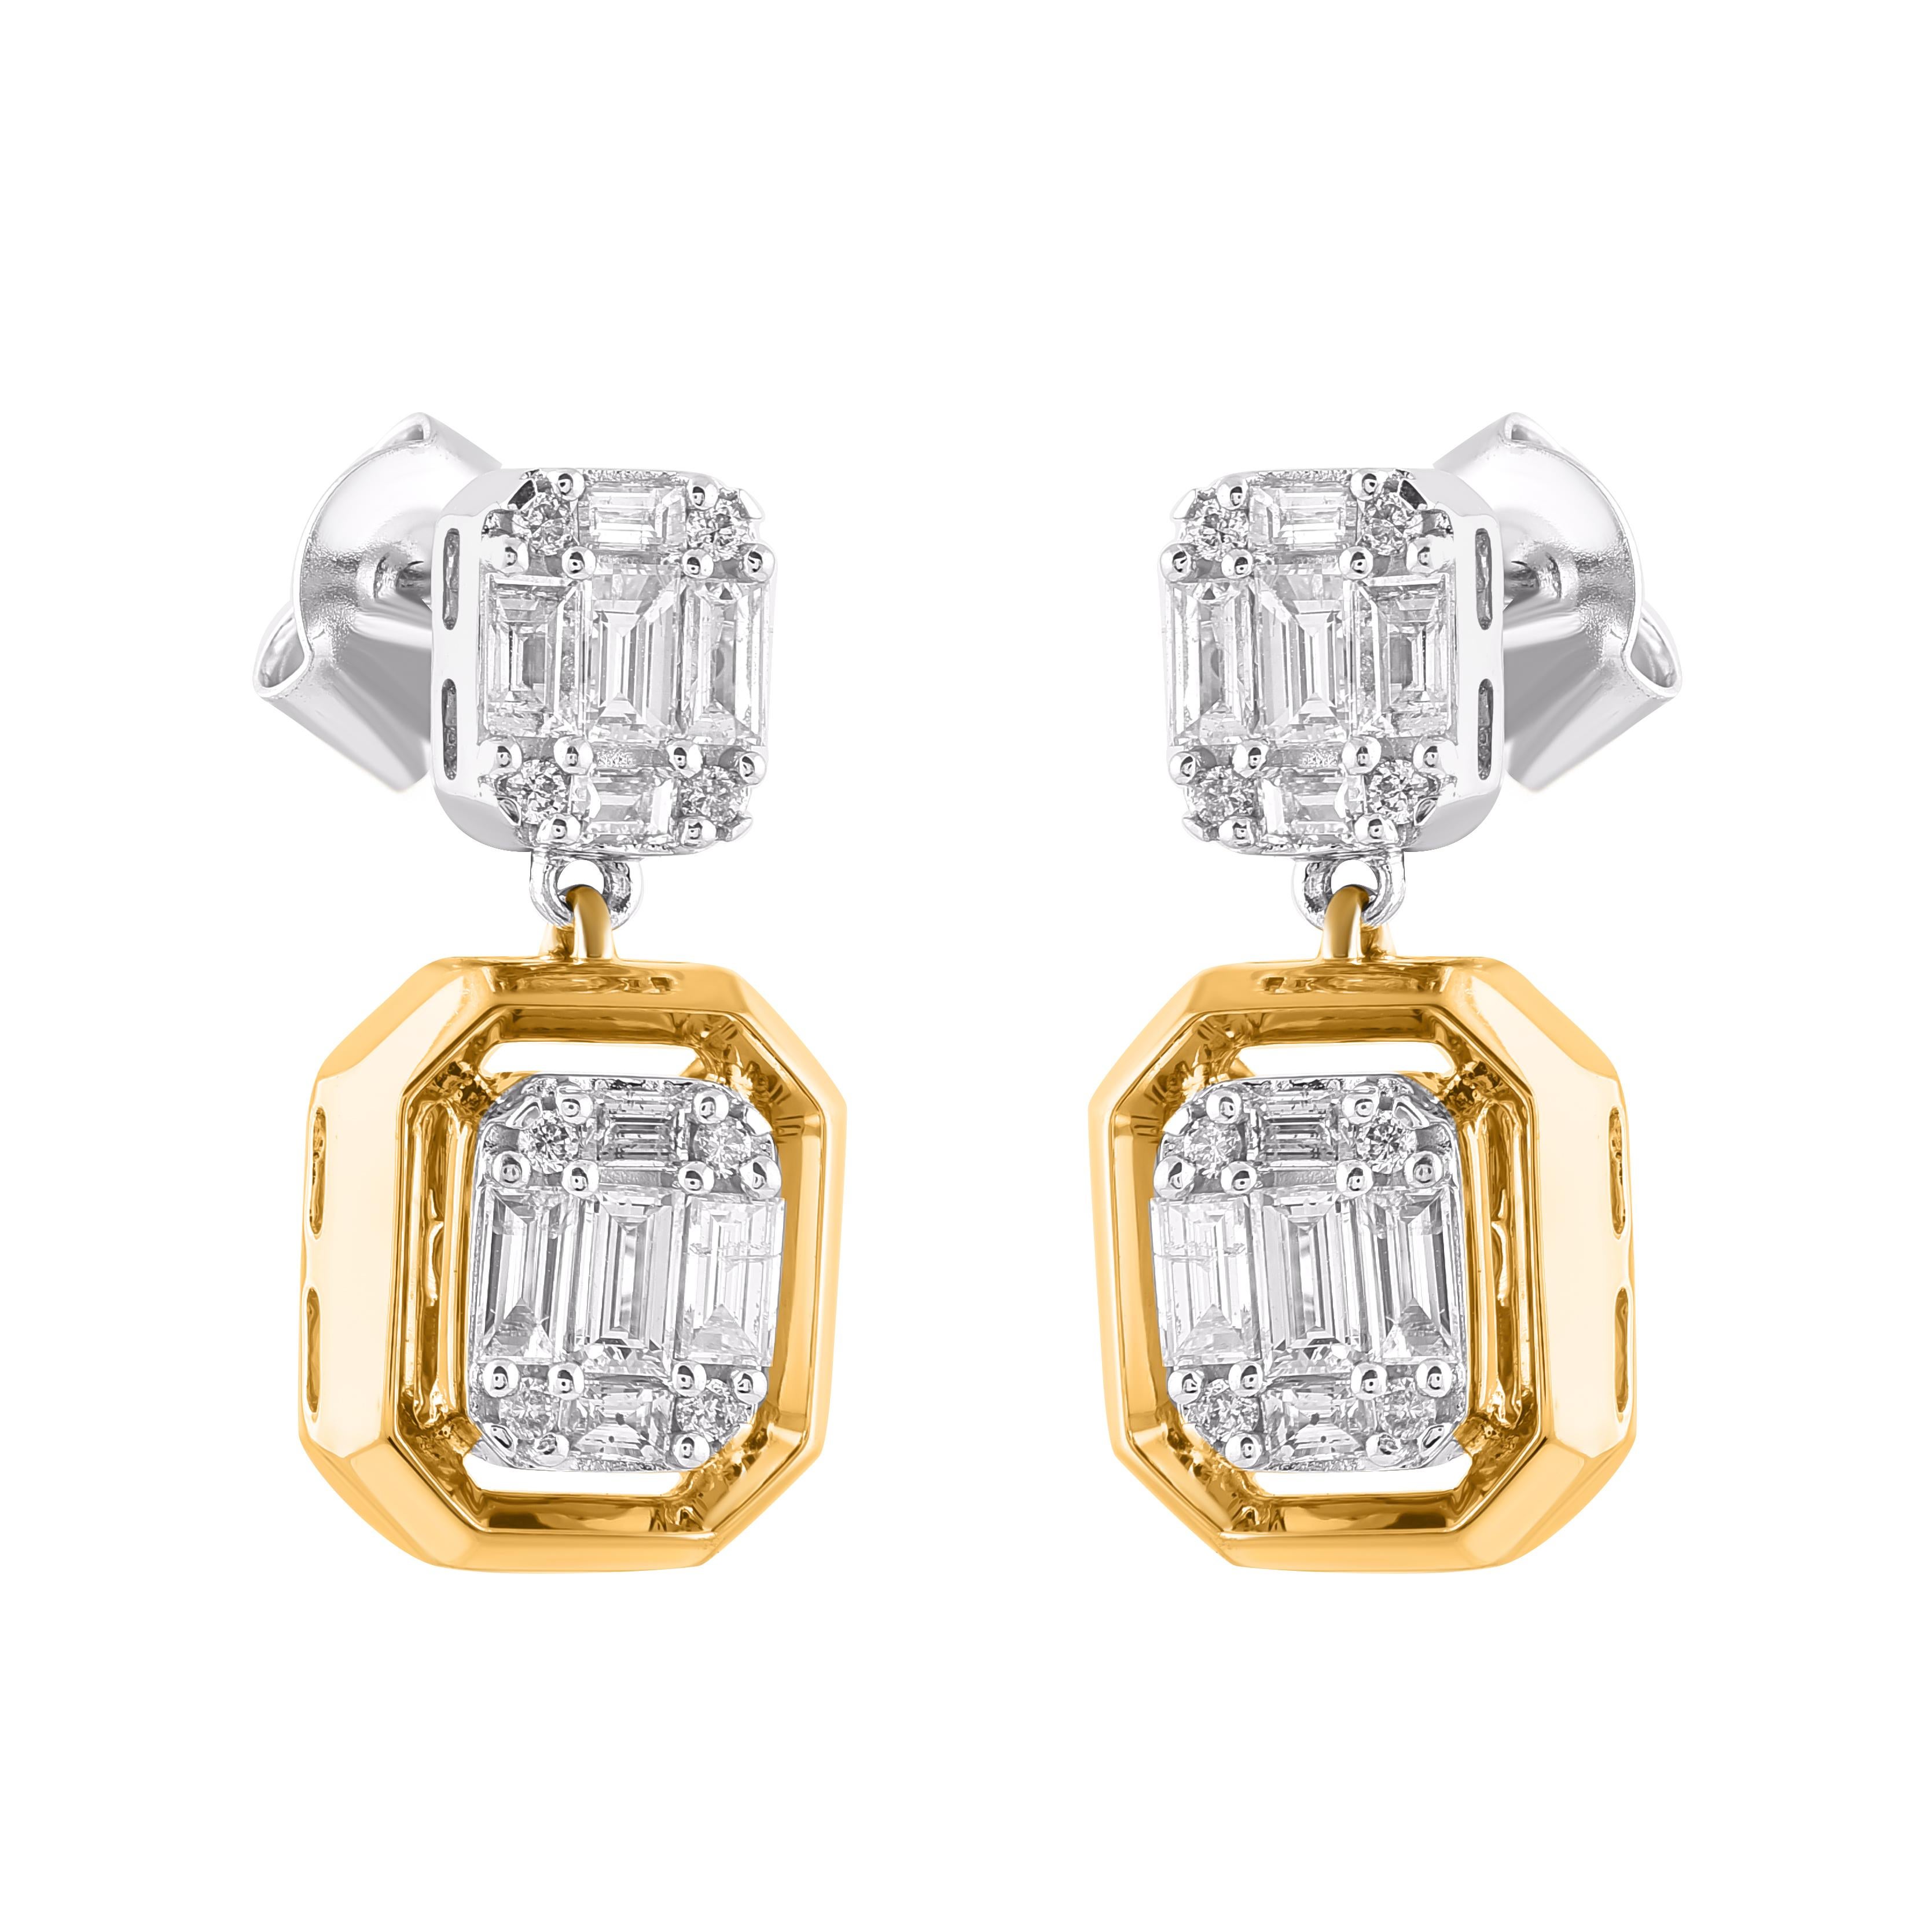 She'll adore the simplicity of these diamond earrings. The earring is crafted from 14-karat two tone gold in your choice of white, rose, or yellow, and features 36 round single cut and baguette cut natural white diamonds set in prong setting. The